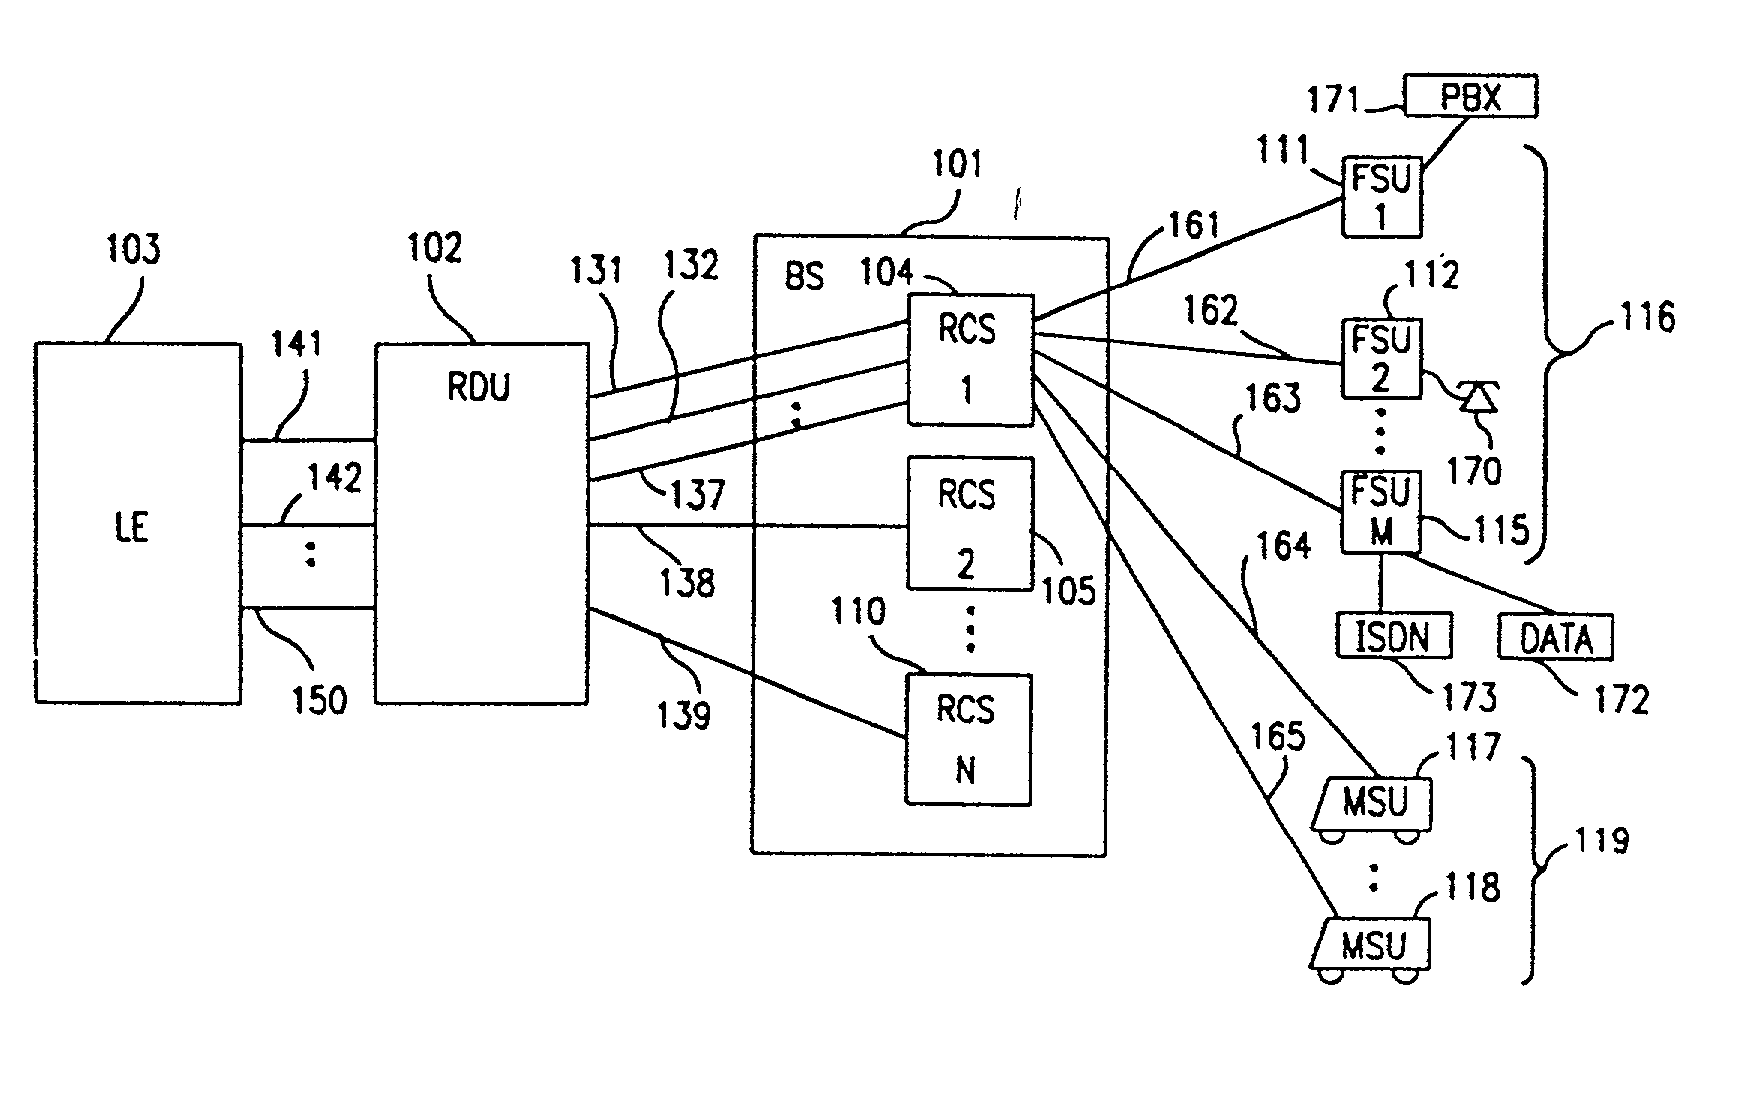 Initial power control for spread-spectrum communications